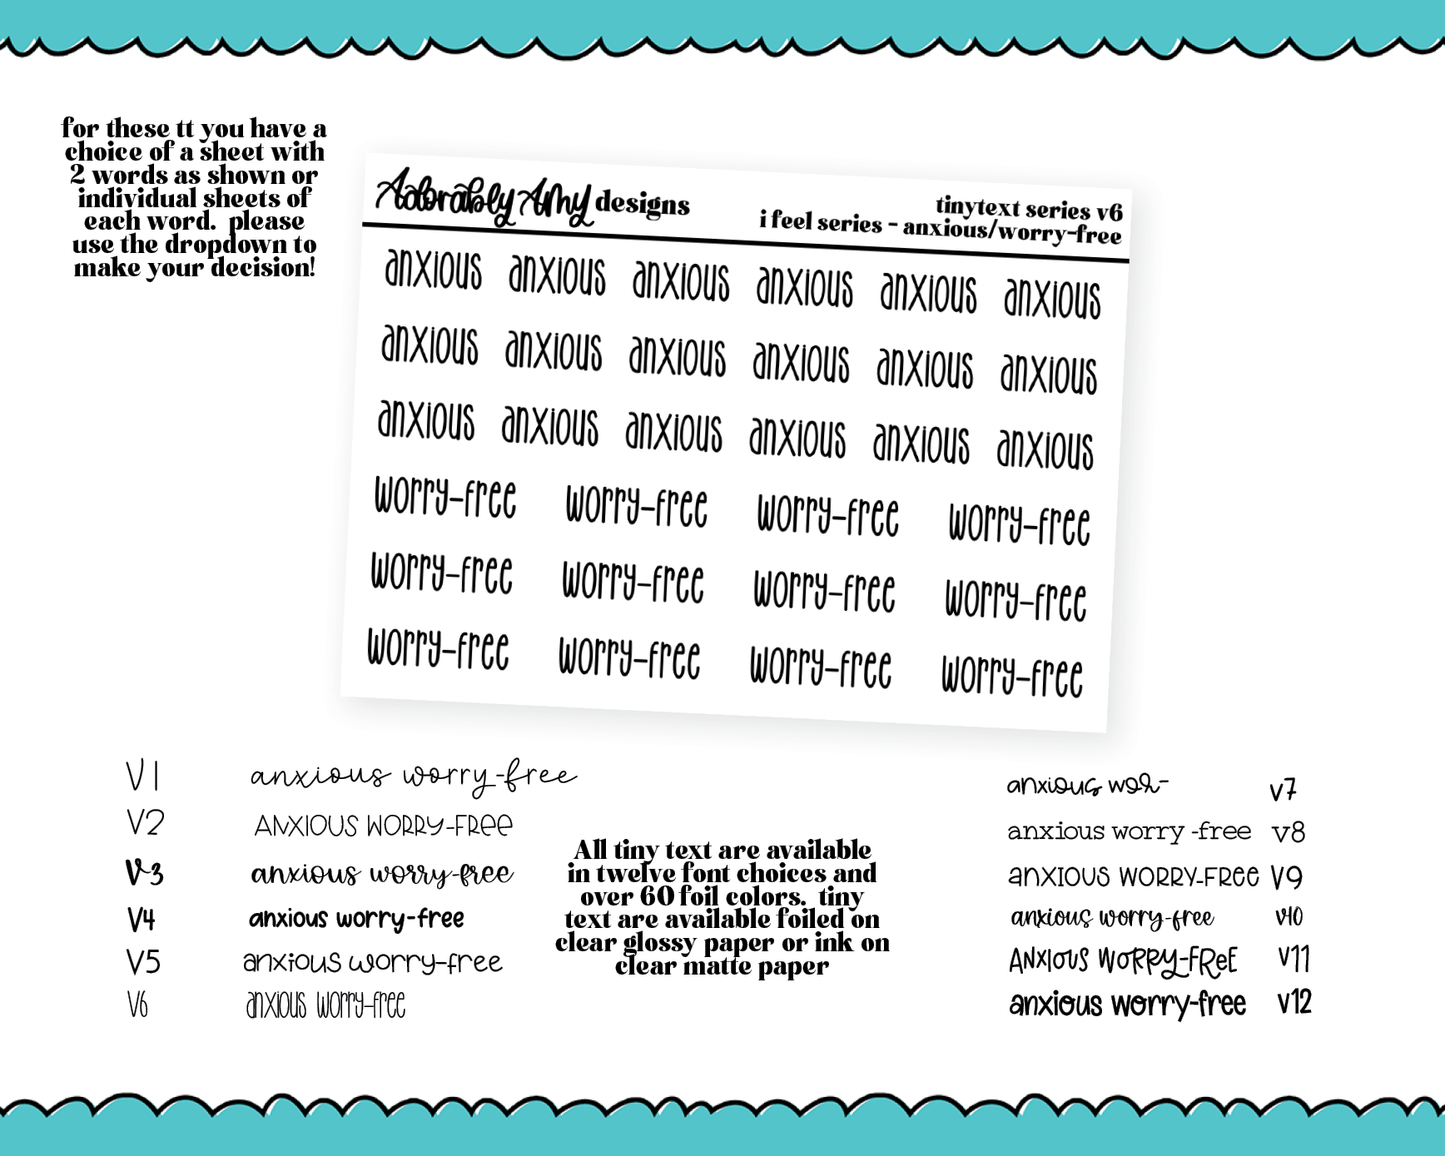 Foiled Tiny Text Series - Feelings Series - Worry-free and Anxious Checklist Size Planner Stickers for any Planner or Insert